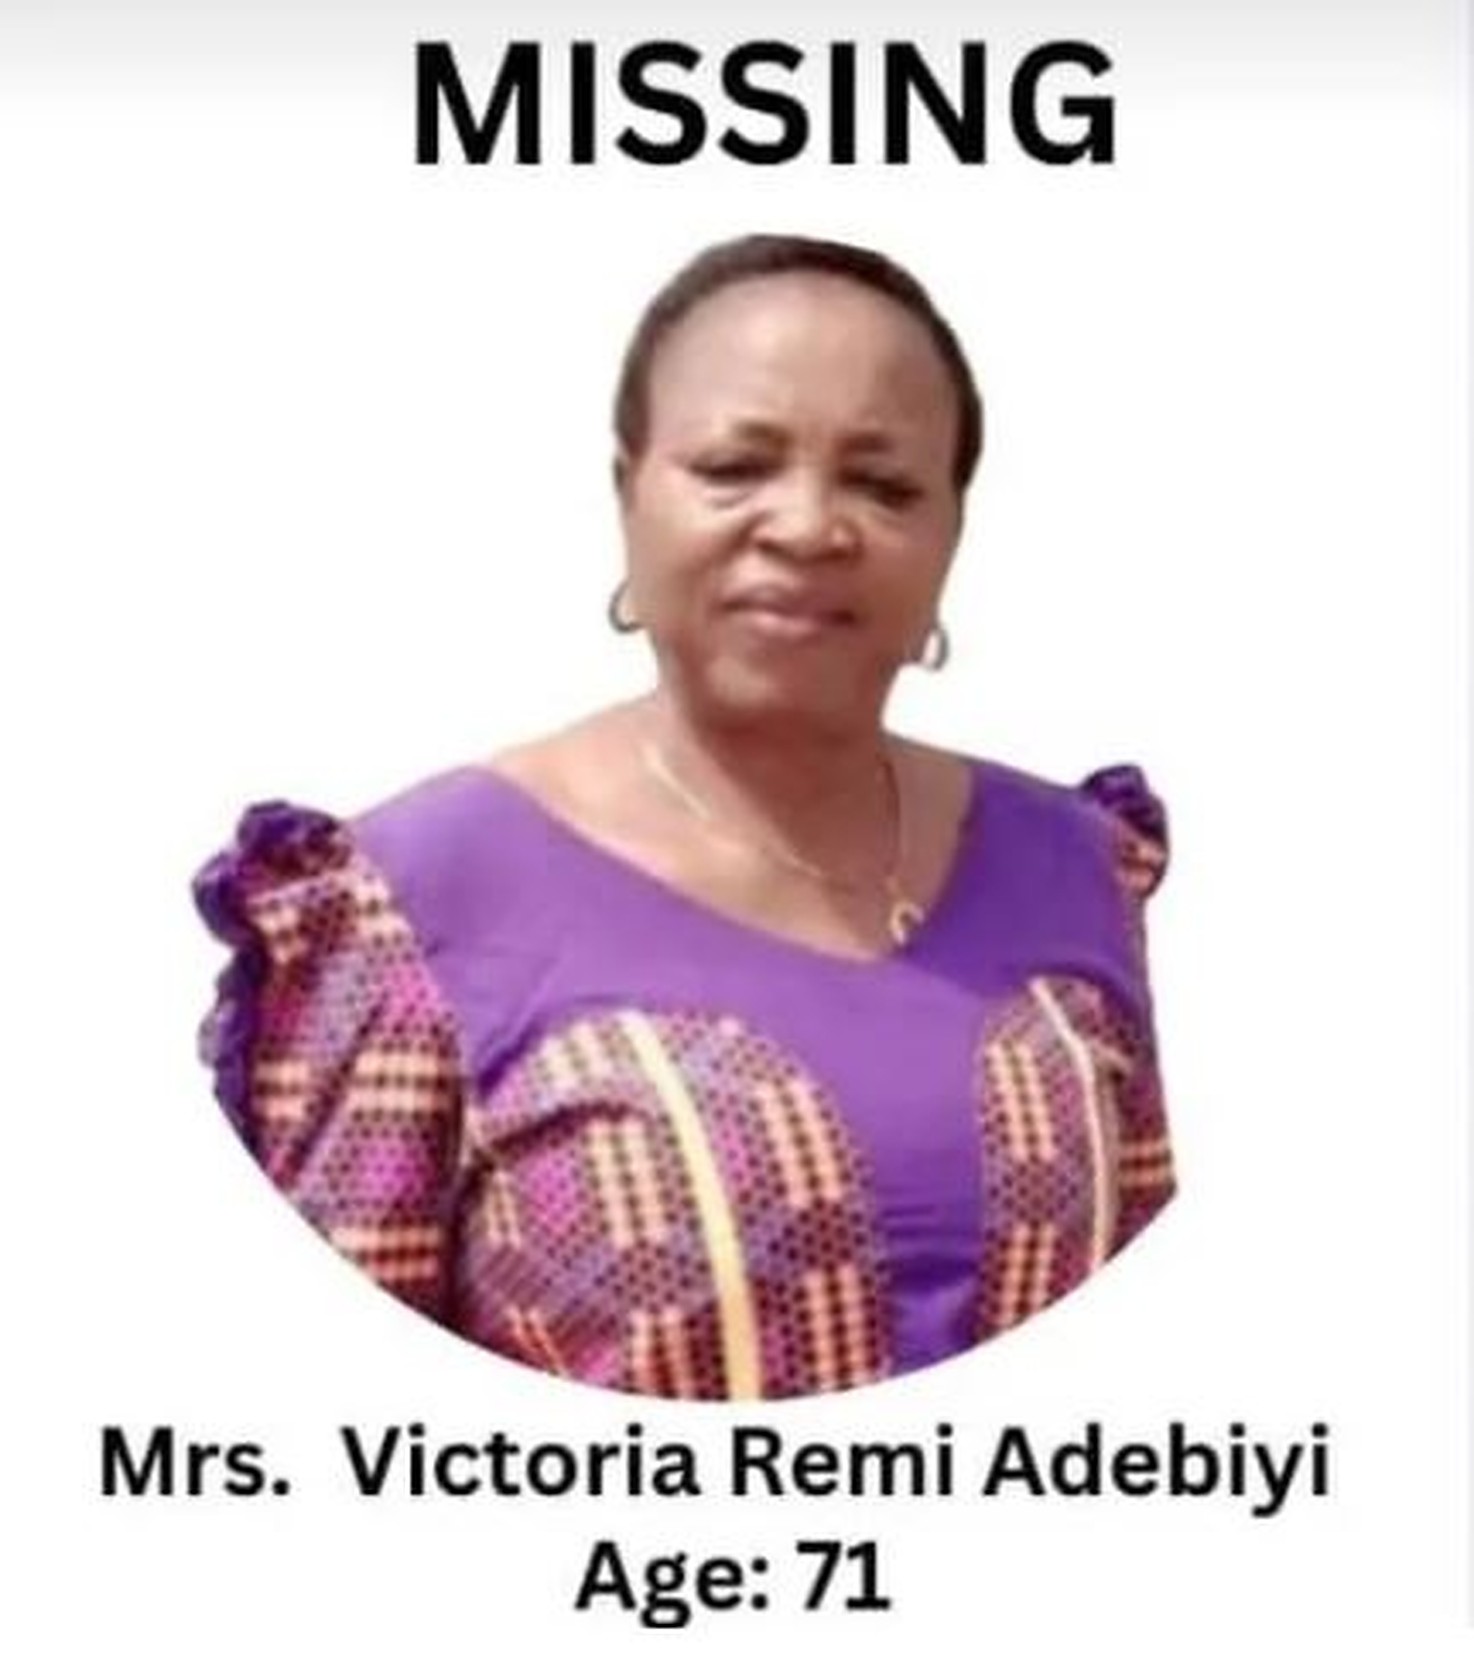 MISSING PERSON: 71-Year-Old Woman Mrs Victoria Remi Adebiyi Declared Missing